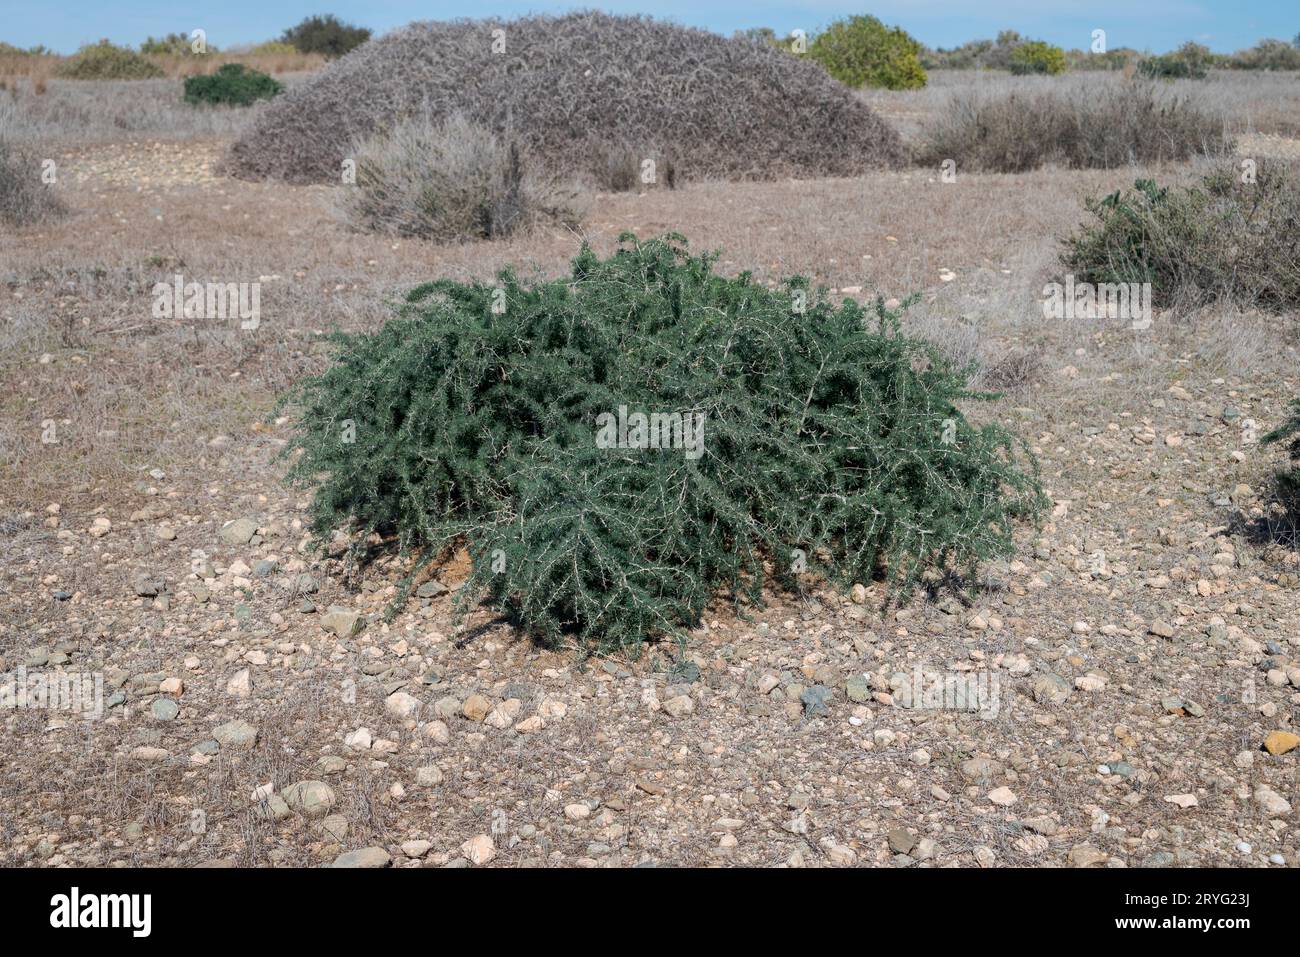 Asparagus albus. Photo taken in the Tabarca Island, province of Alicante, Spain Stock Photo